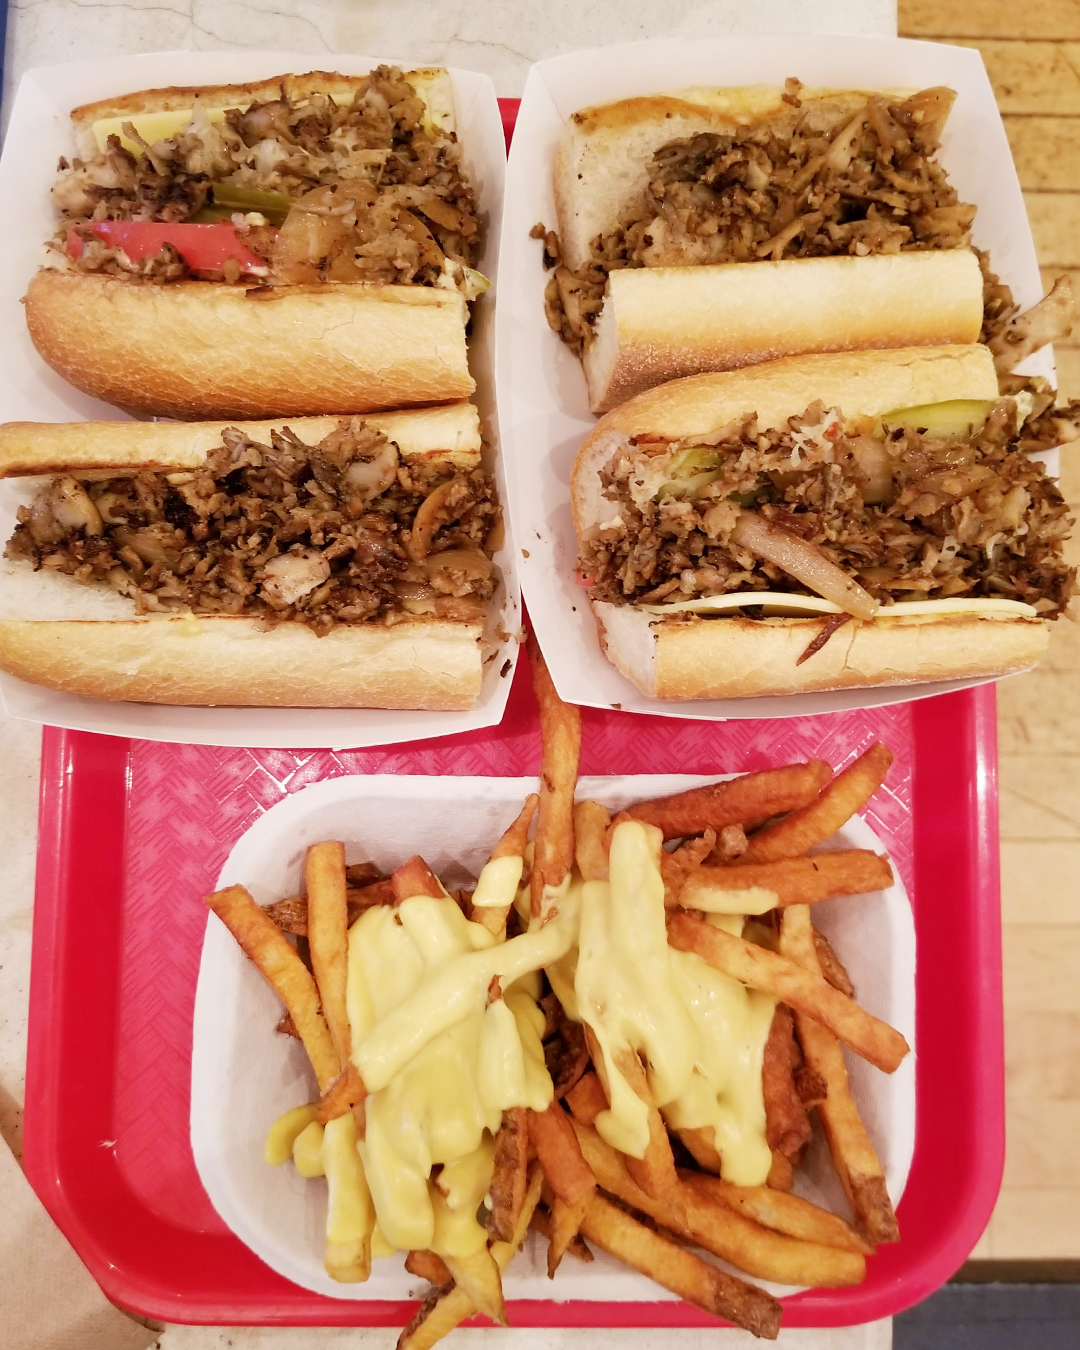 A Tribute To Wiz Kid, Home to The Best Vegan Cheesesteaks in Philly